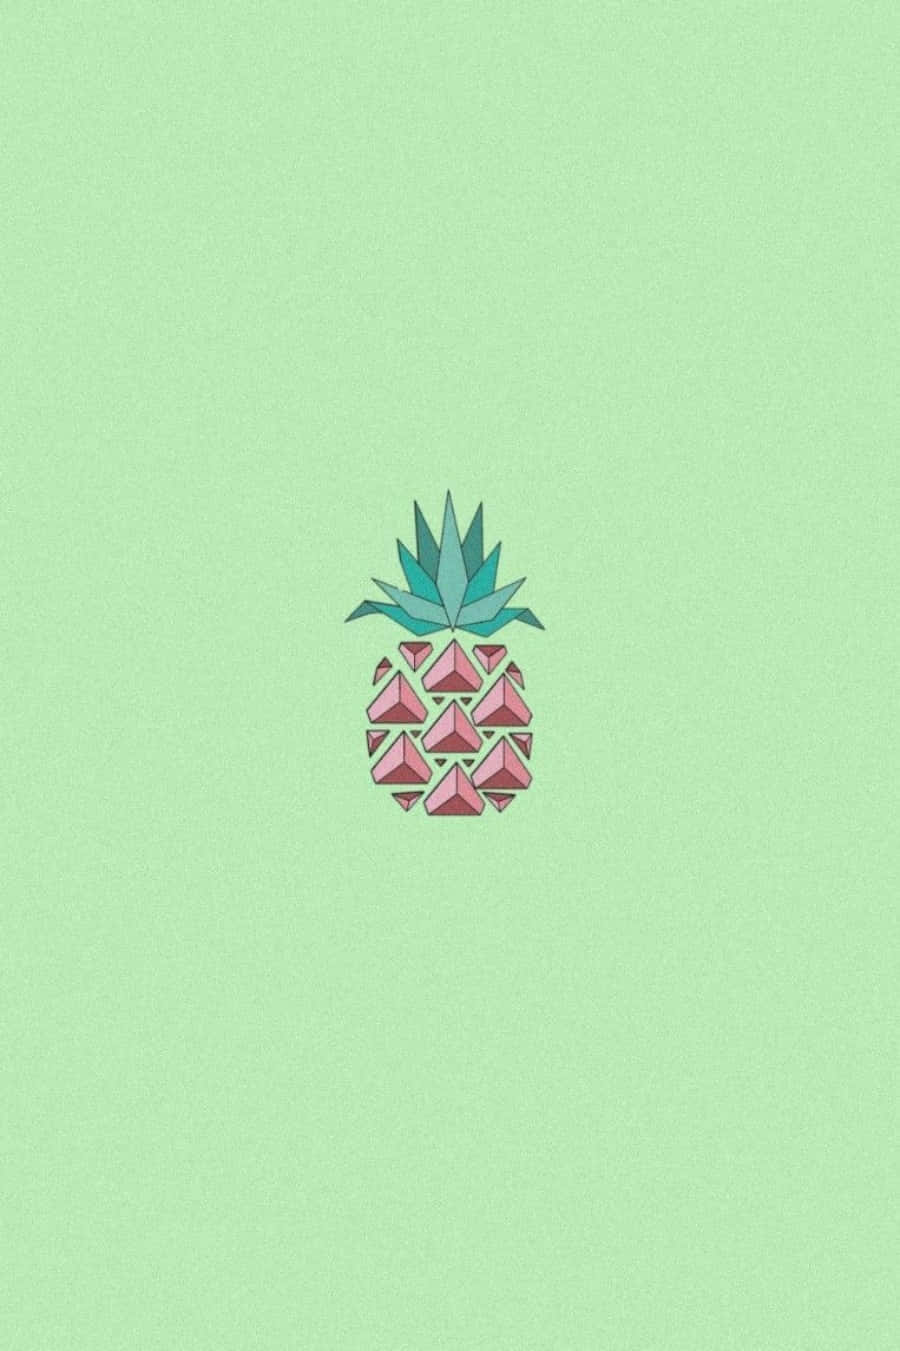 A Pineapple On A Green Background Wallpaper